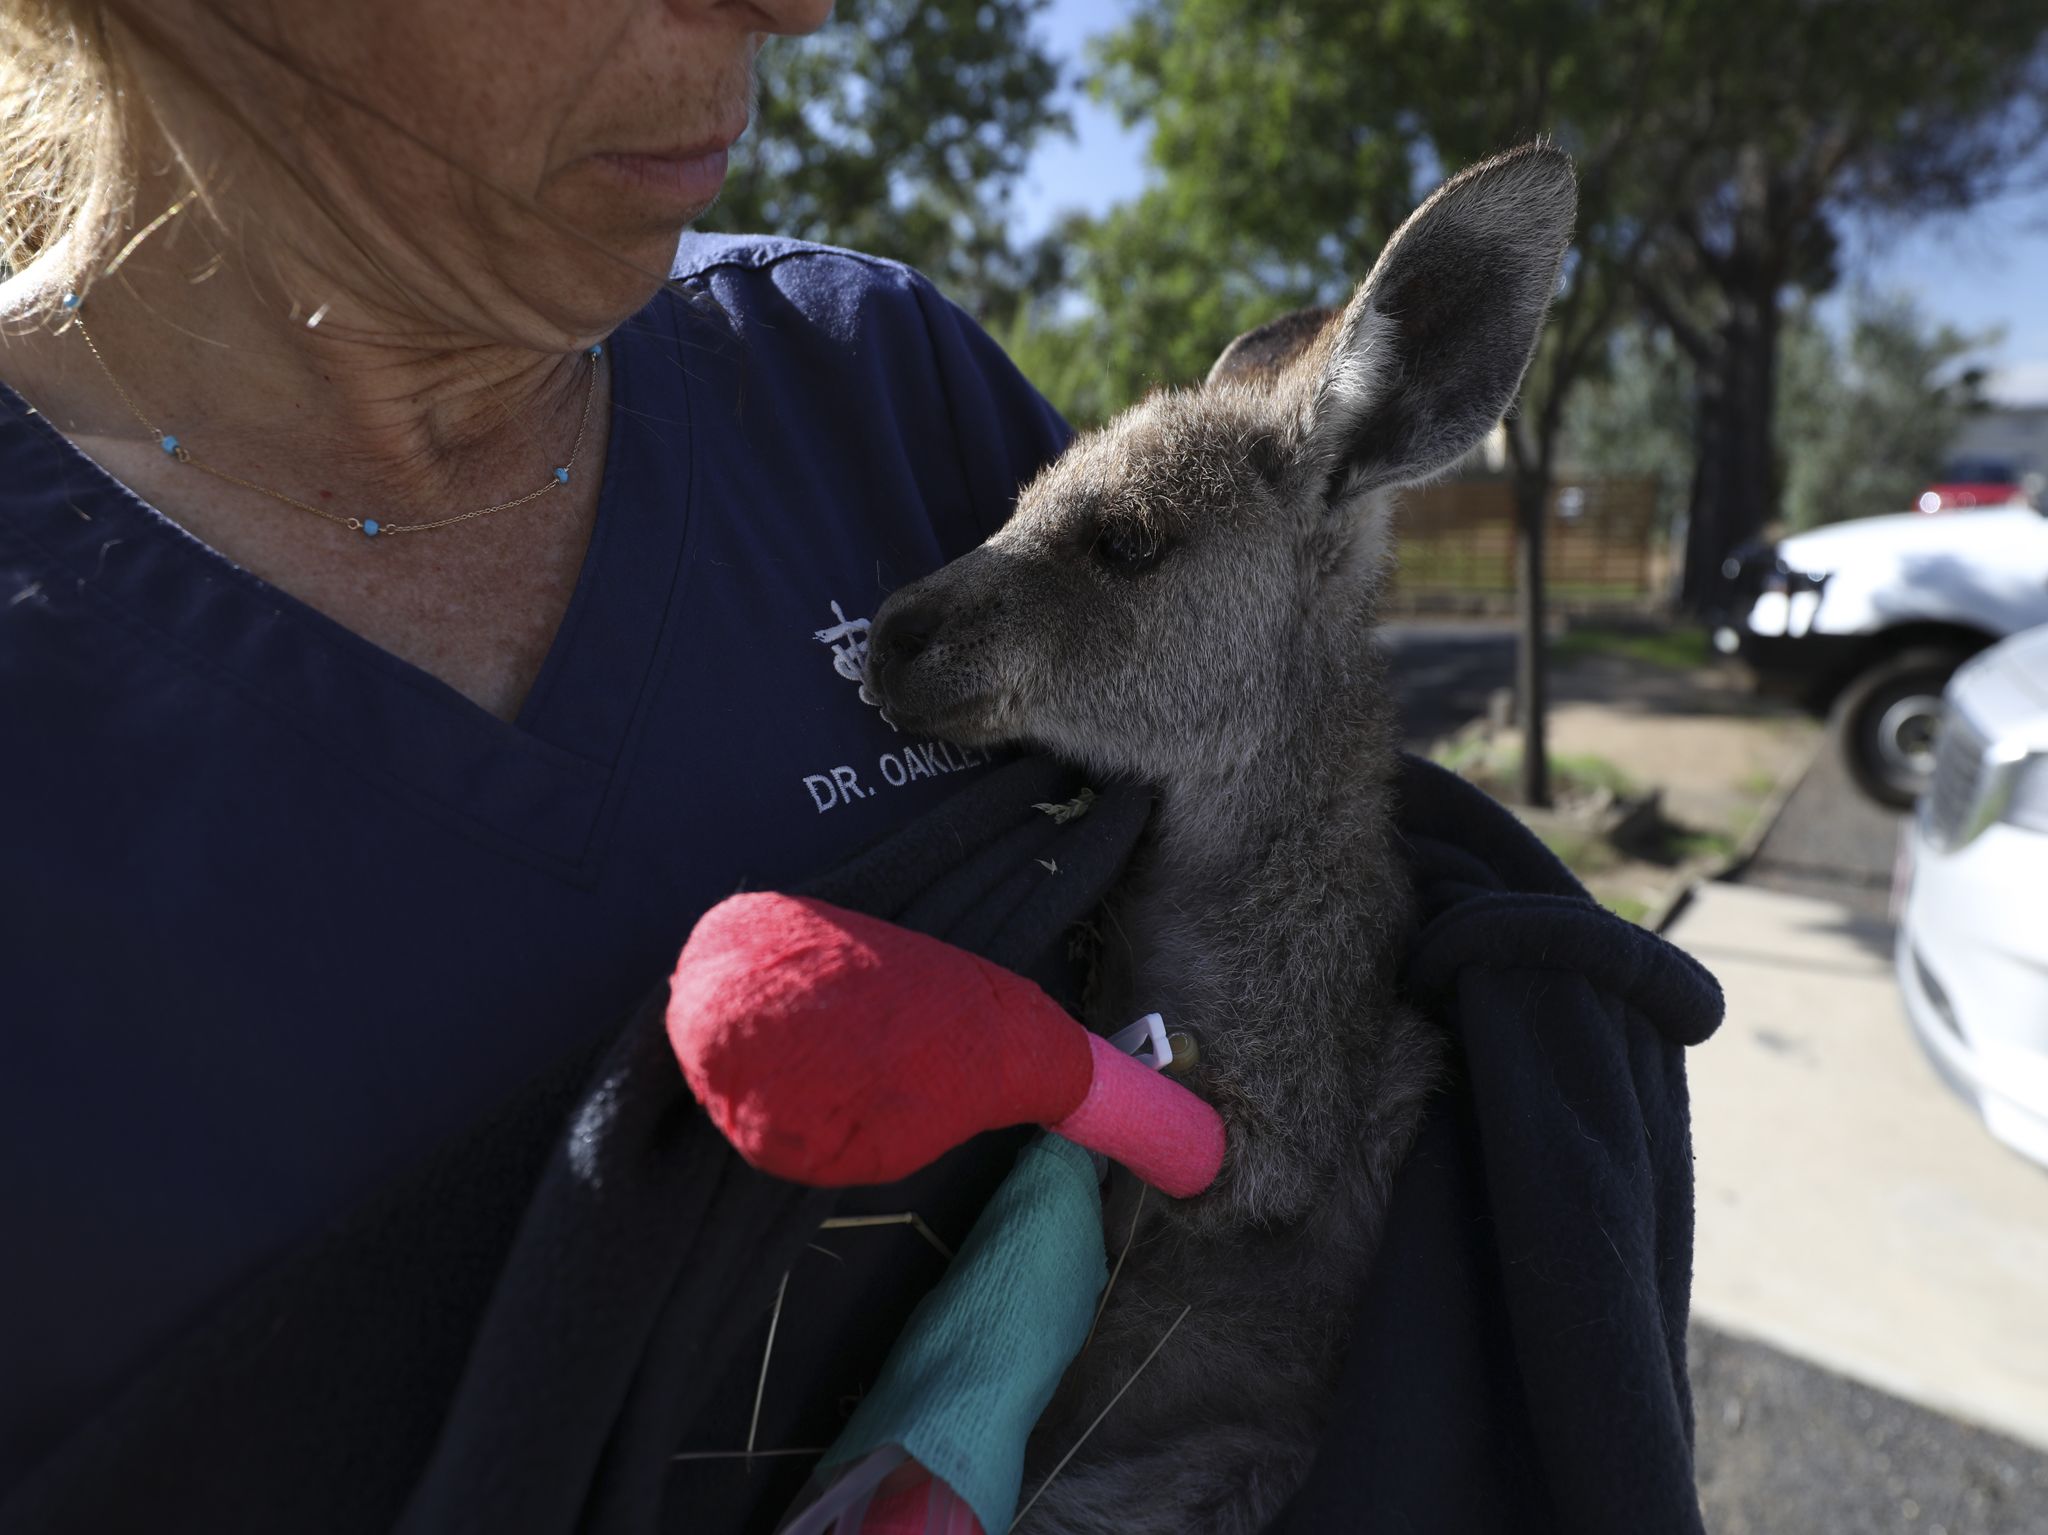 Dr. Michelle Oakley holds a recovering kangaroo. This image is from Dr. Oakley, Yukon Vet. [Photo of the day - November 2020]